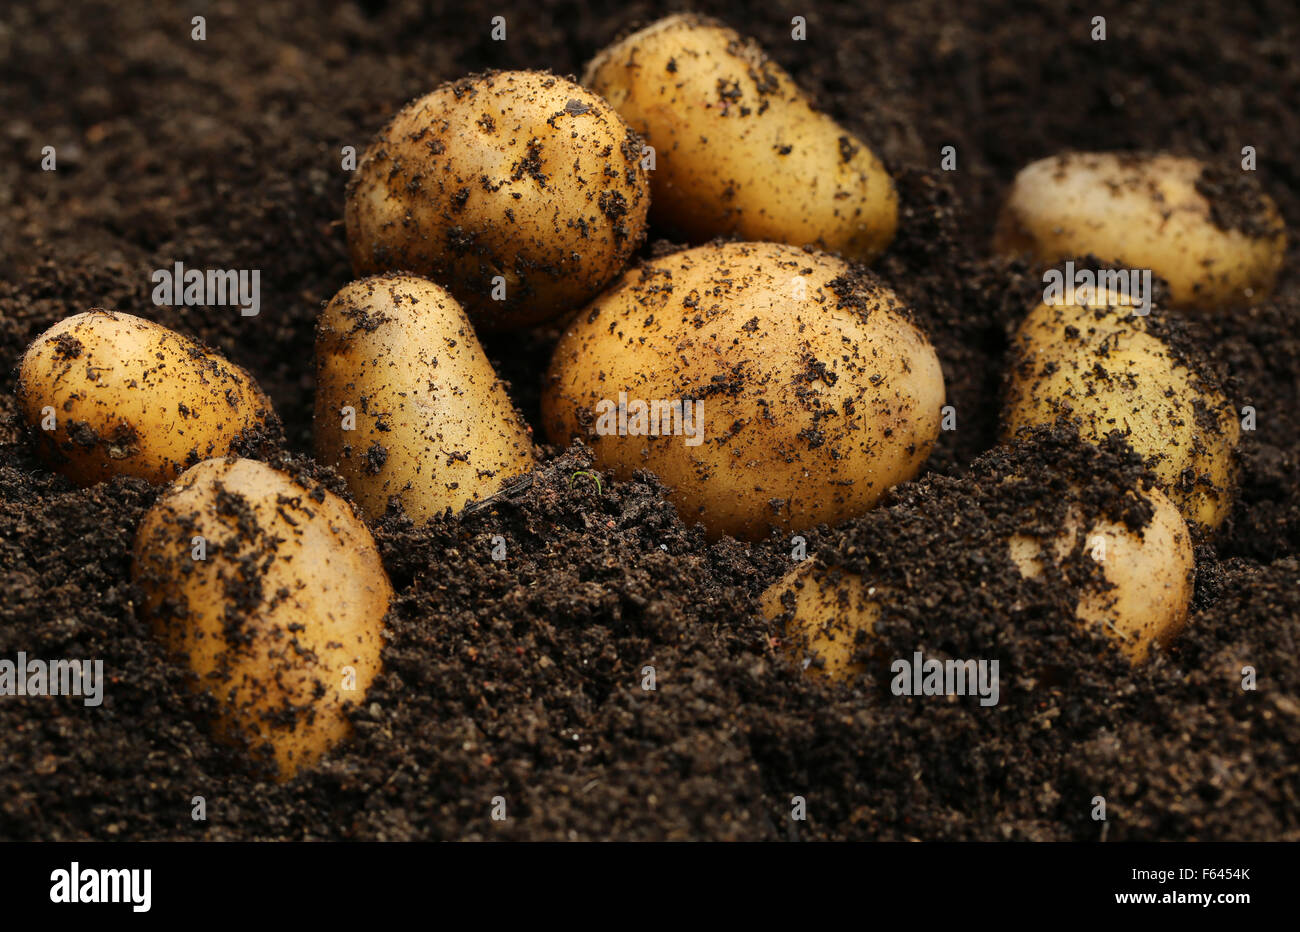 Newly harvested potatoes in ground Stock Photo